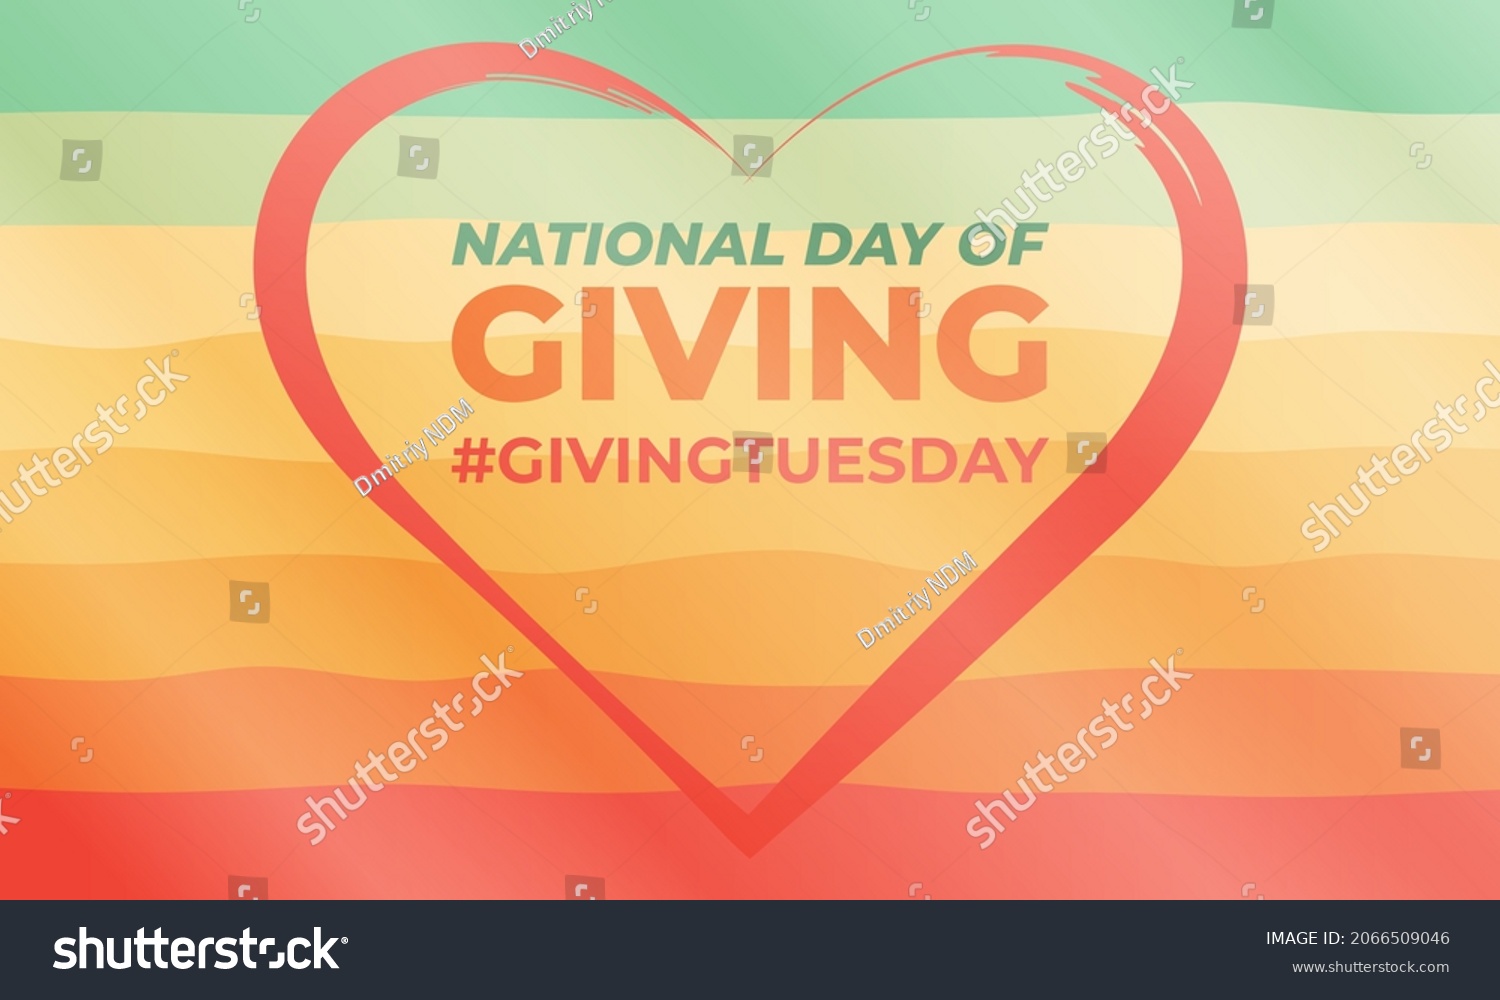 National Day Giving Givingtuesday Encourages Giving Stock Vector